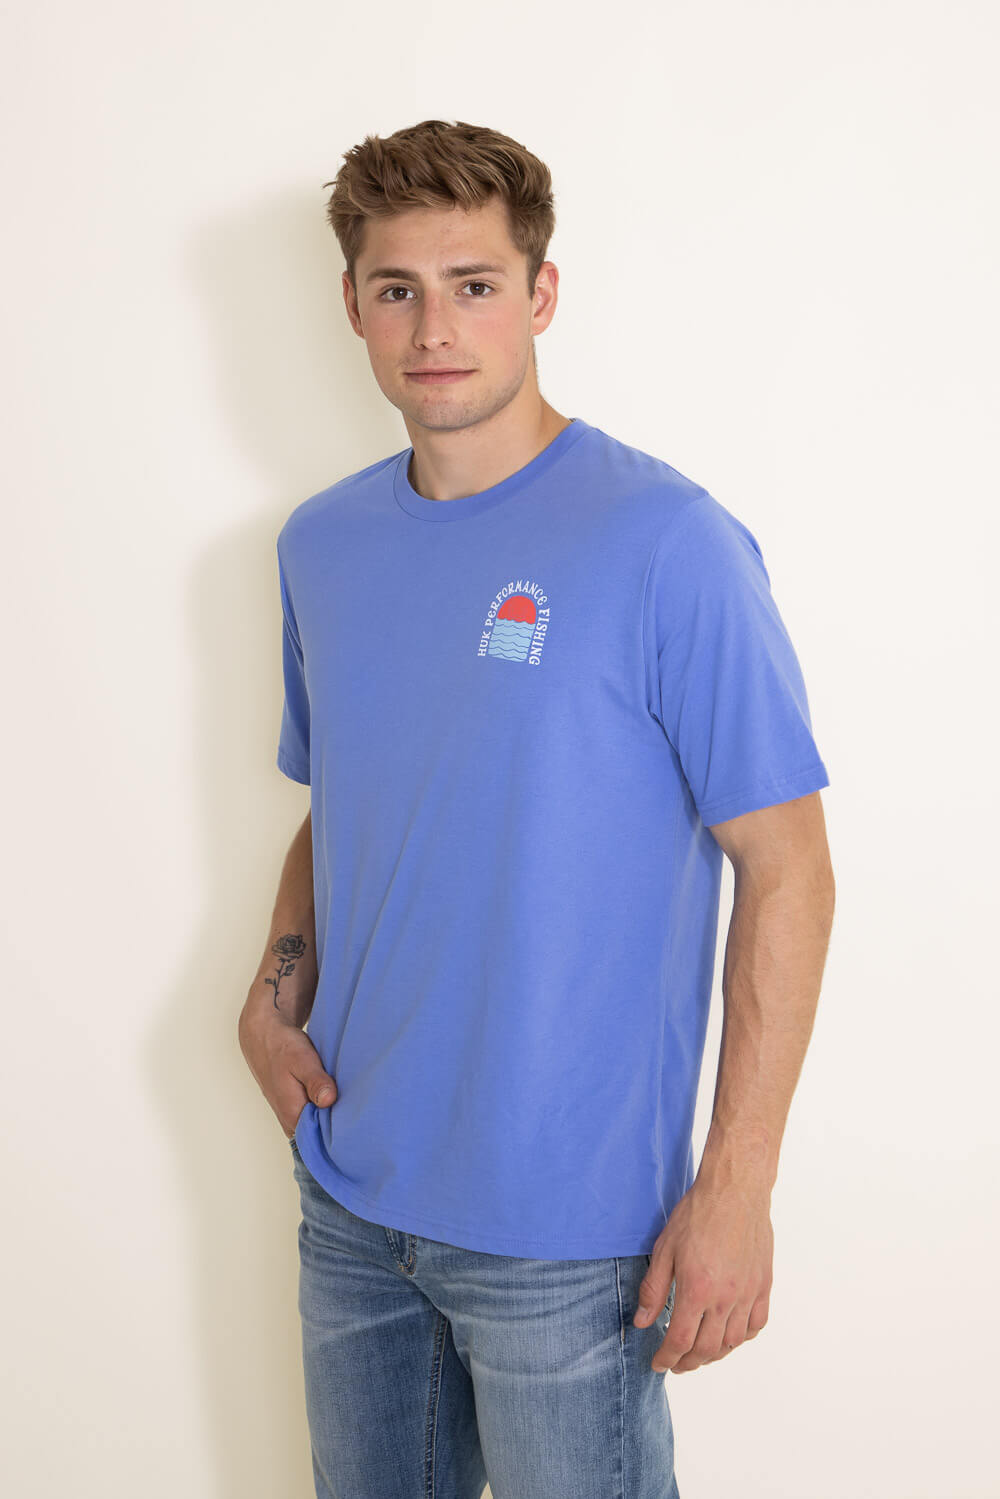 Huk Fishing Sun and Surf T-Shirt for Men in Wedgewood